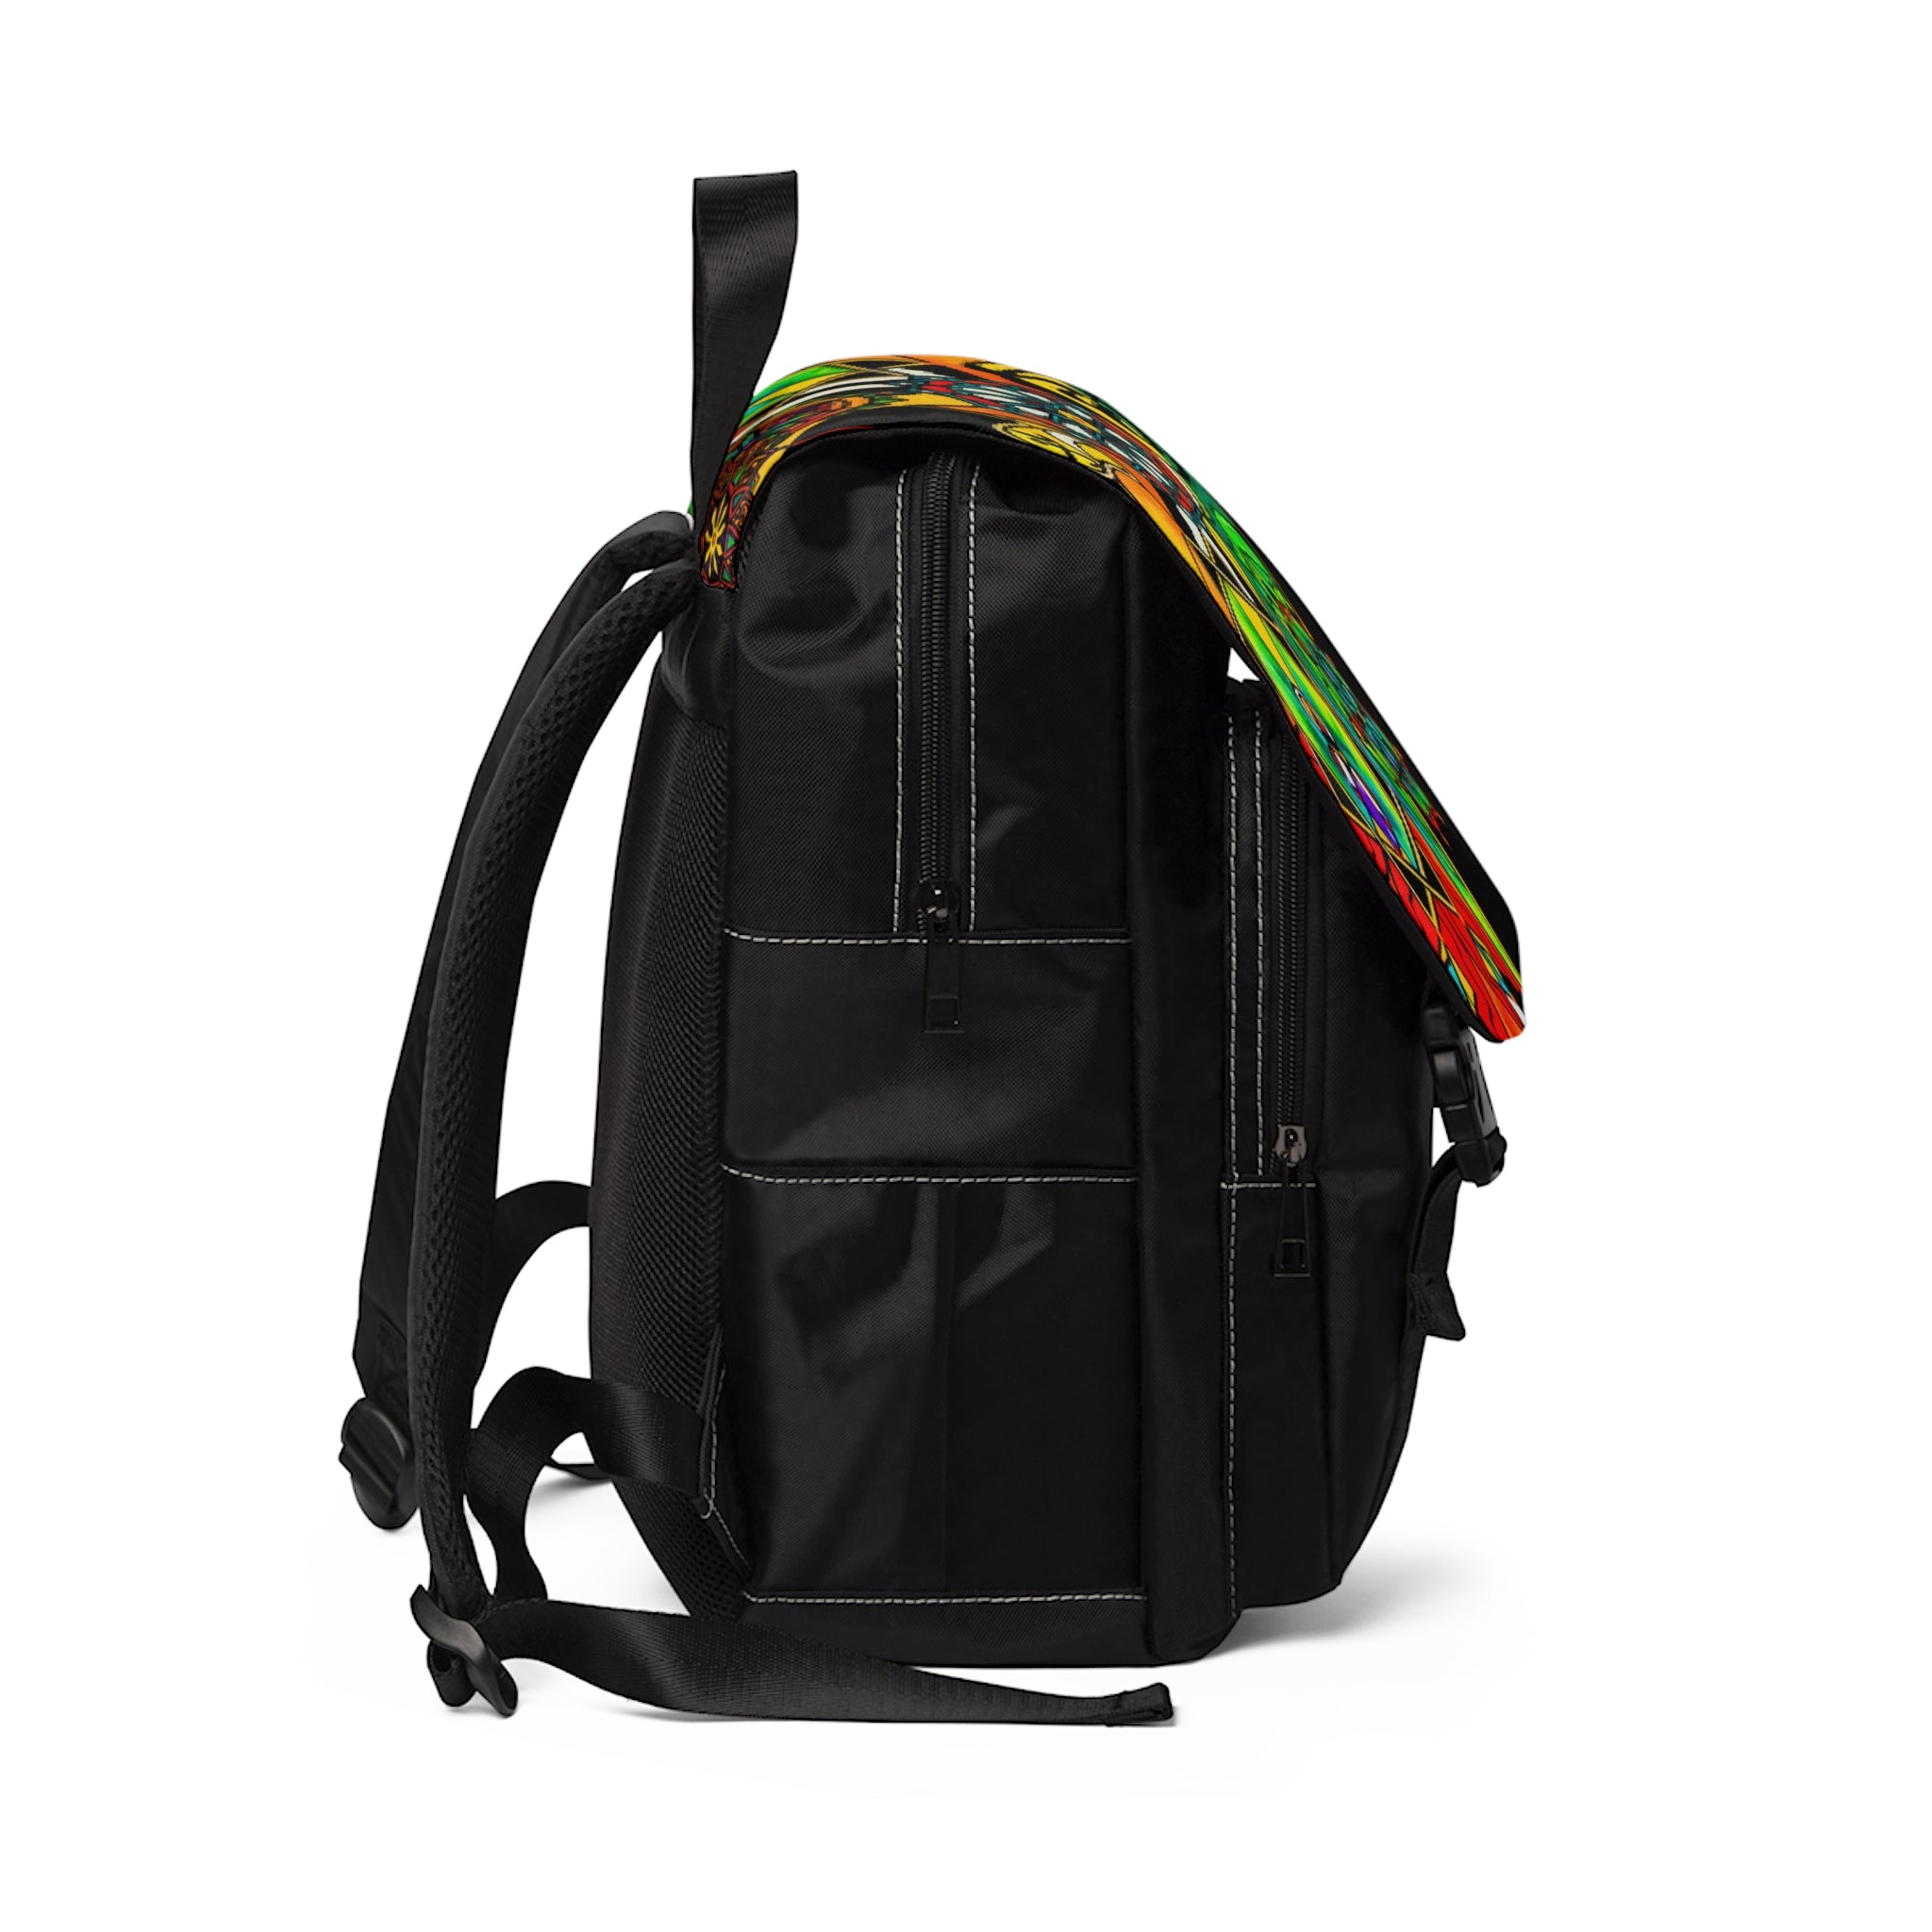 we-believe-in-helping-you-find-the-perfect-muhammad-consciousness-unisex-casual-shoulder-backpack-online_1.jpg